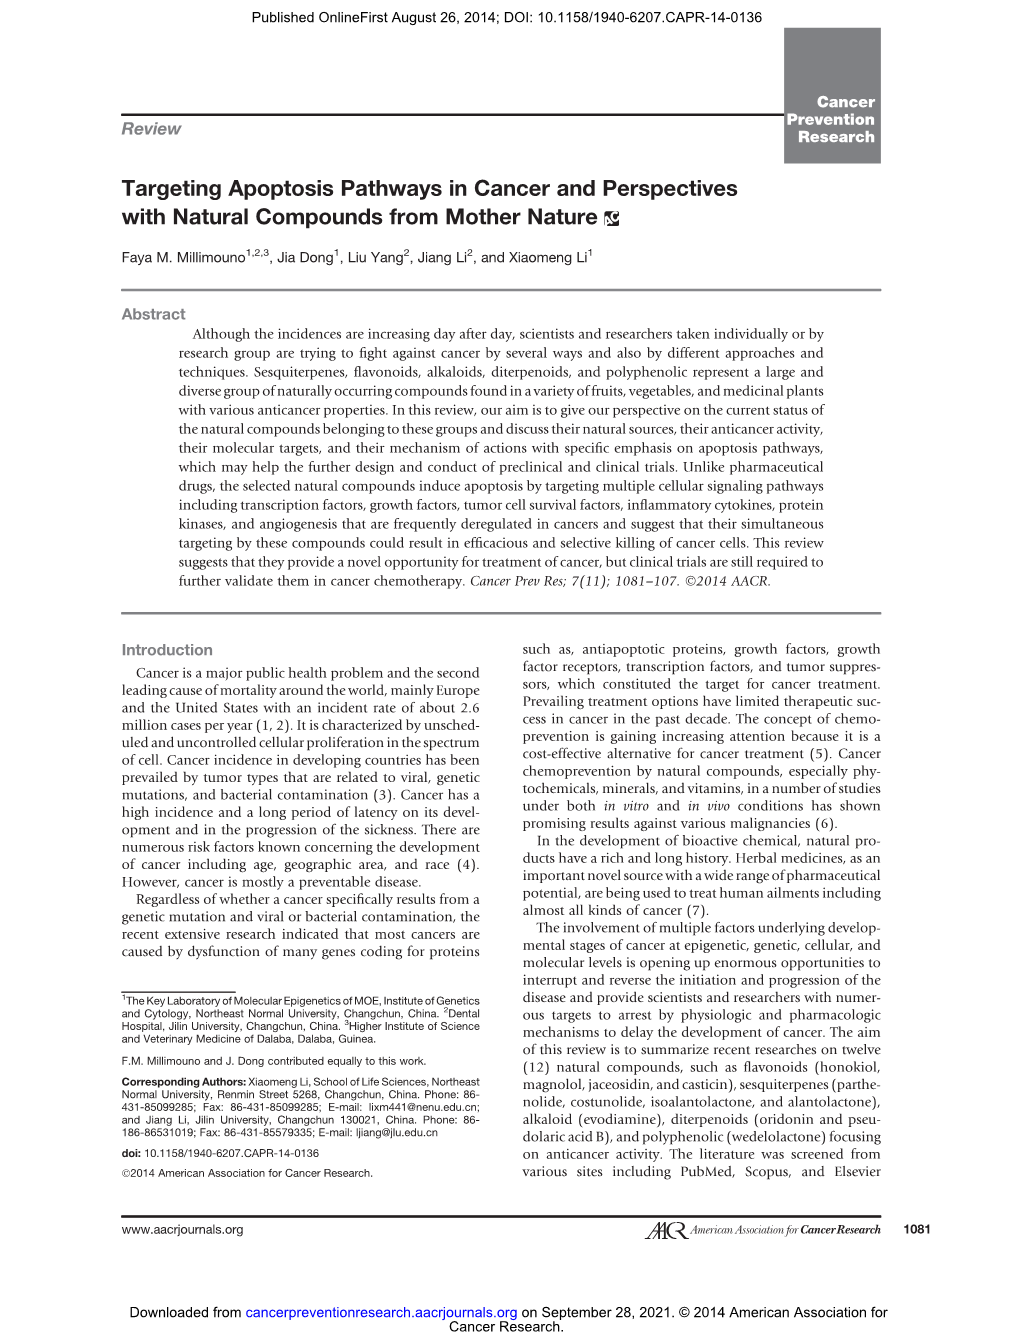 Targeting Apoptosis Pathways in Cancer and Perspectives with Natural Compounds from Mother Nature